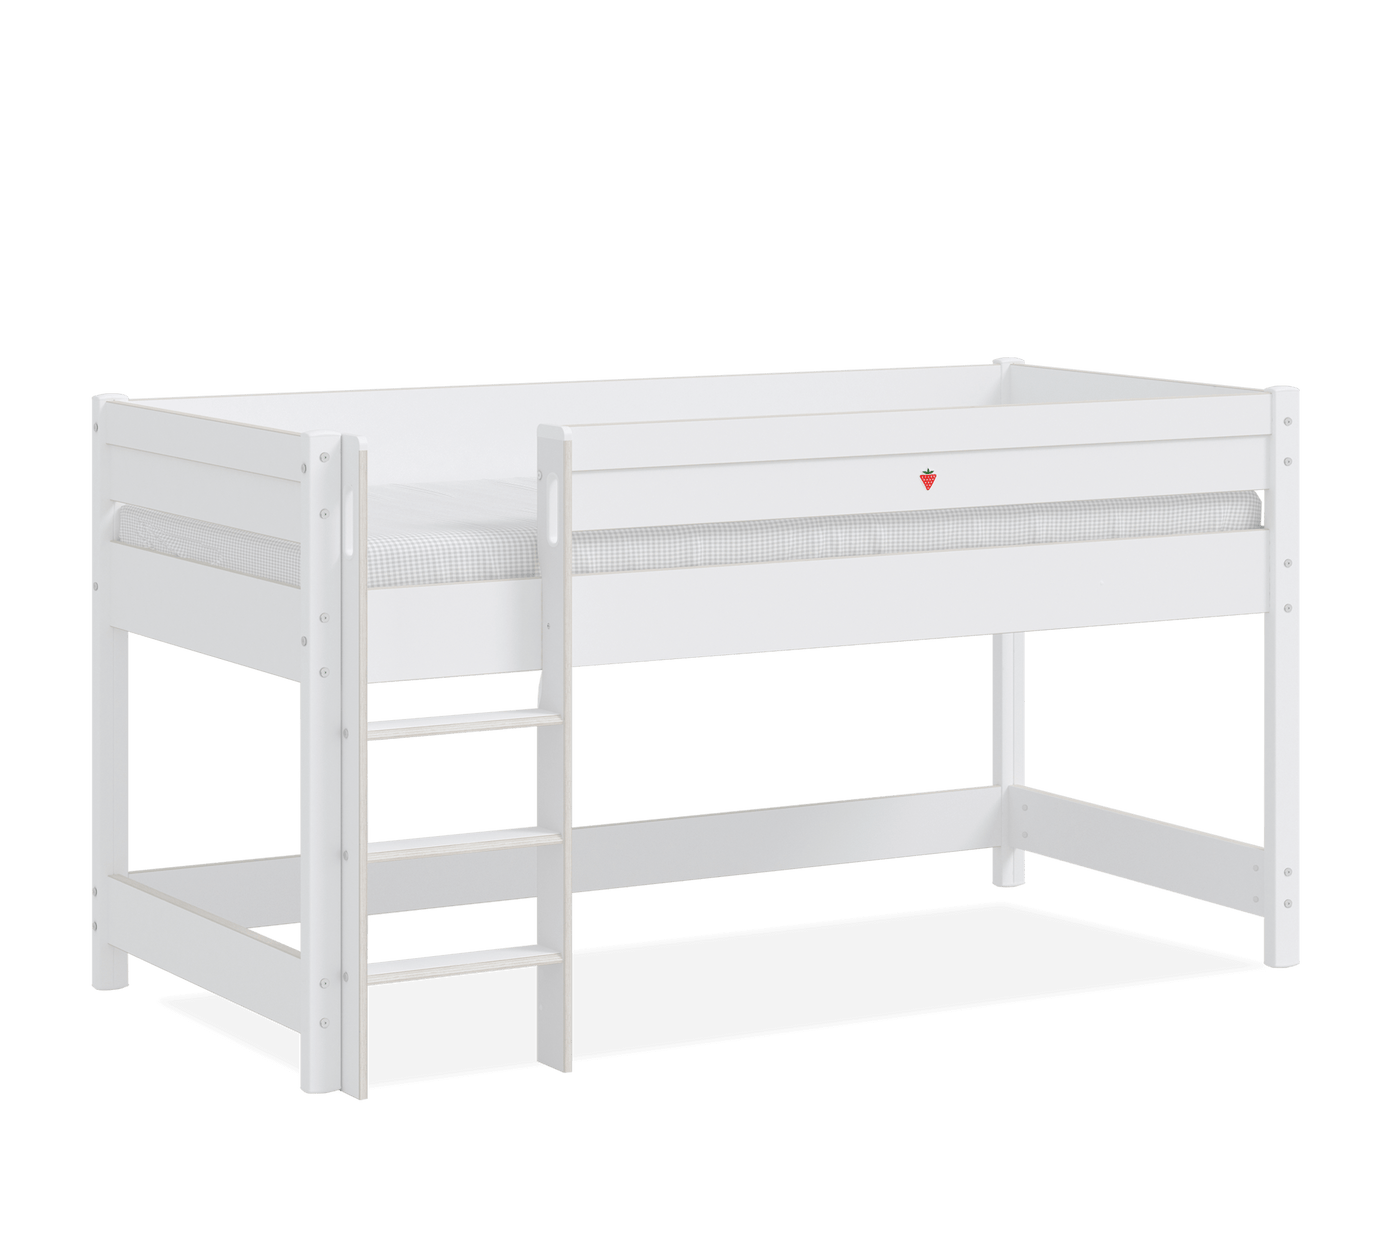 Montes White Medium Tall Bed [90x200 Cm] - ON ORDER ONLY